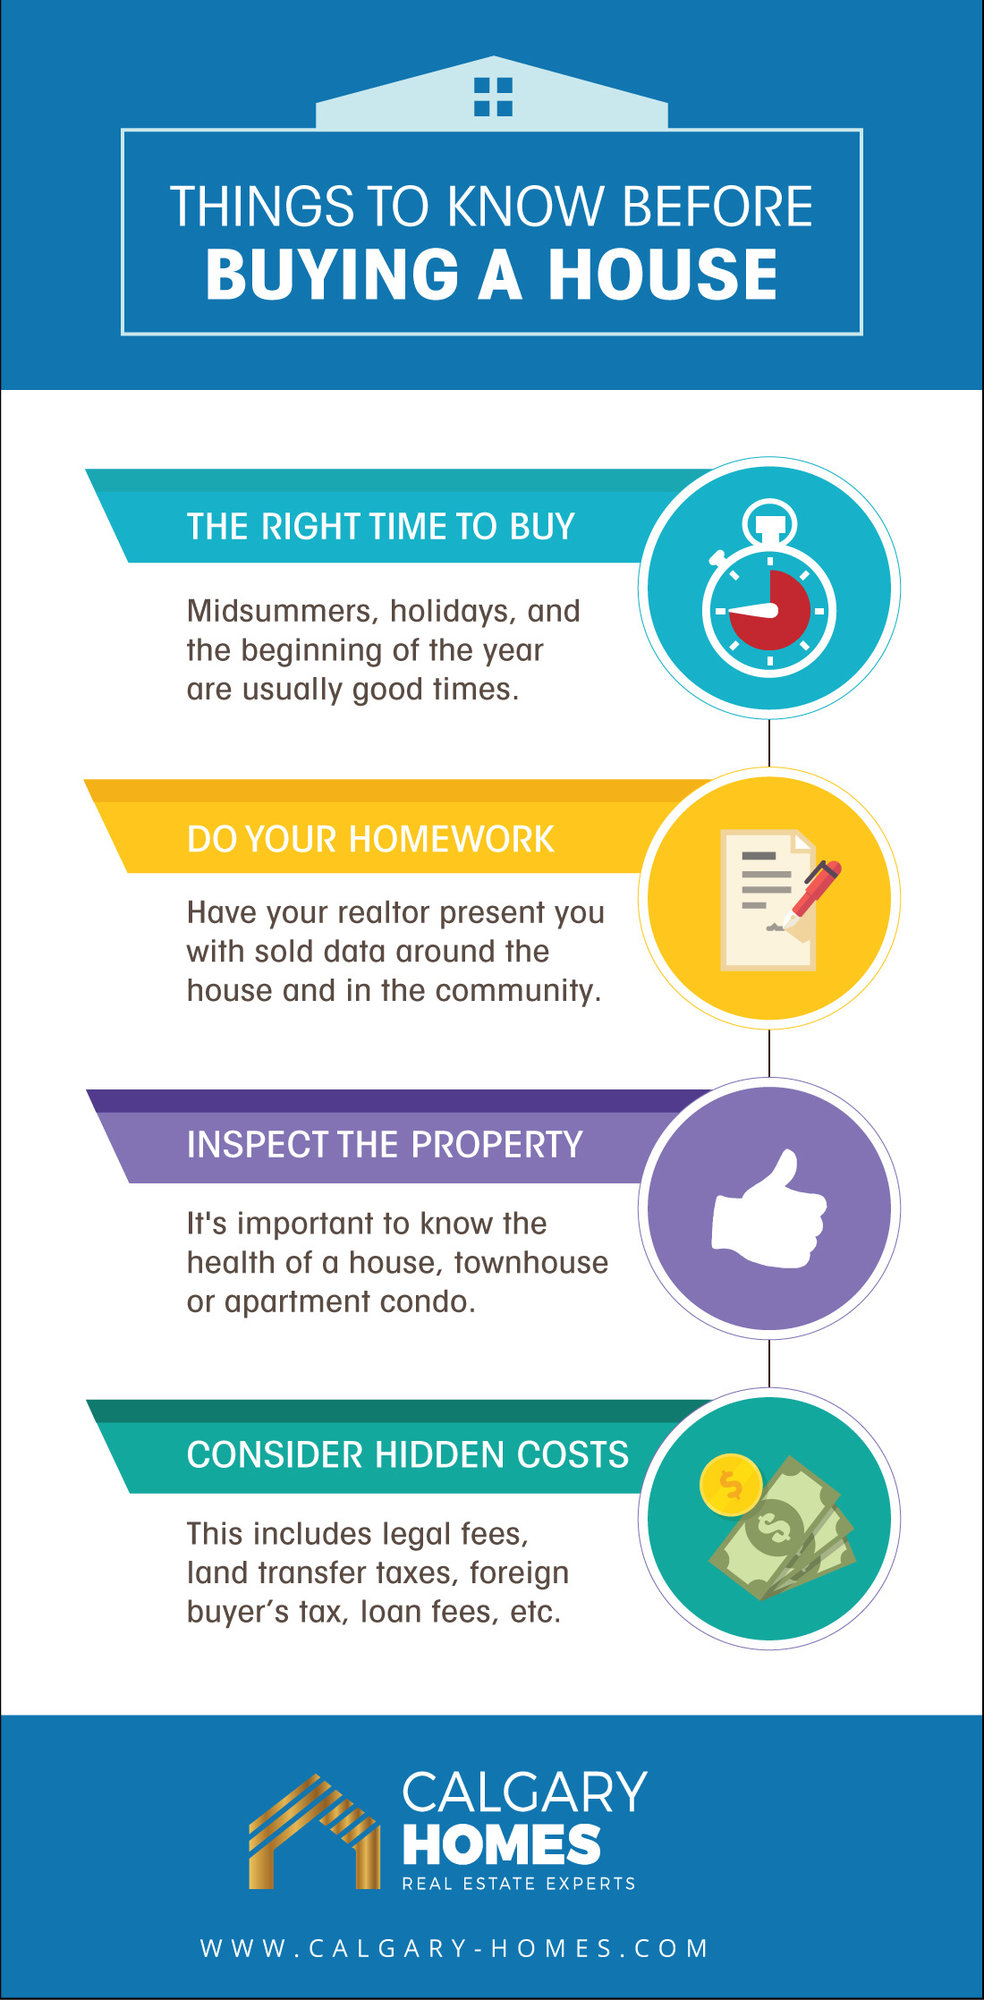 Things to Know Before Buying a House